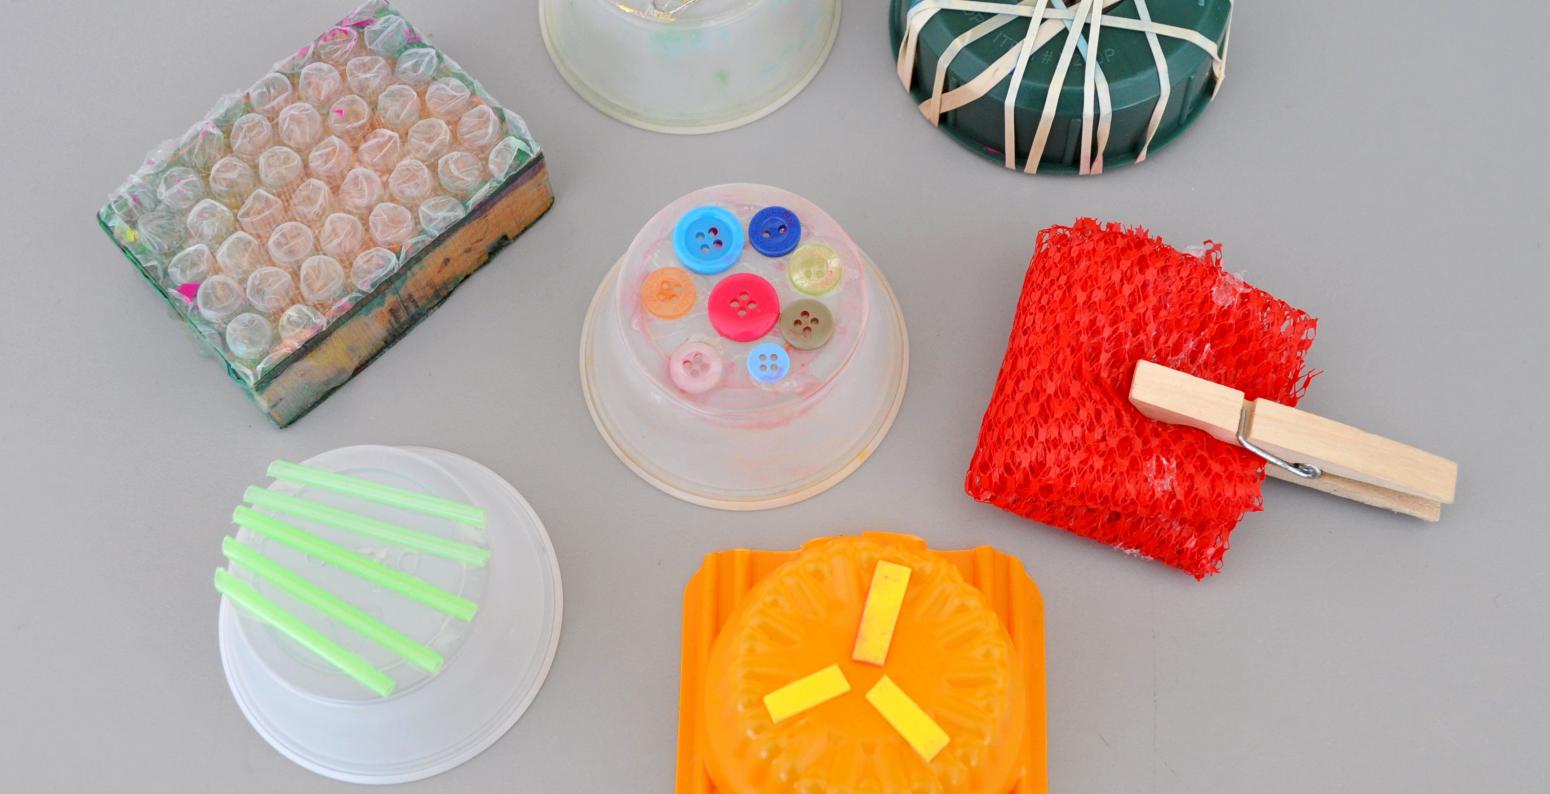 A collection of stamps made from found materials such as bubble wrap, plastic cups, rubber bands, and buttons.